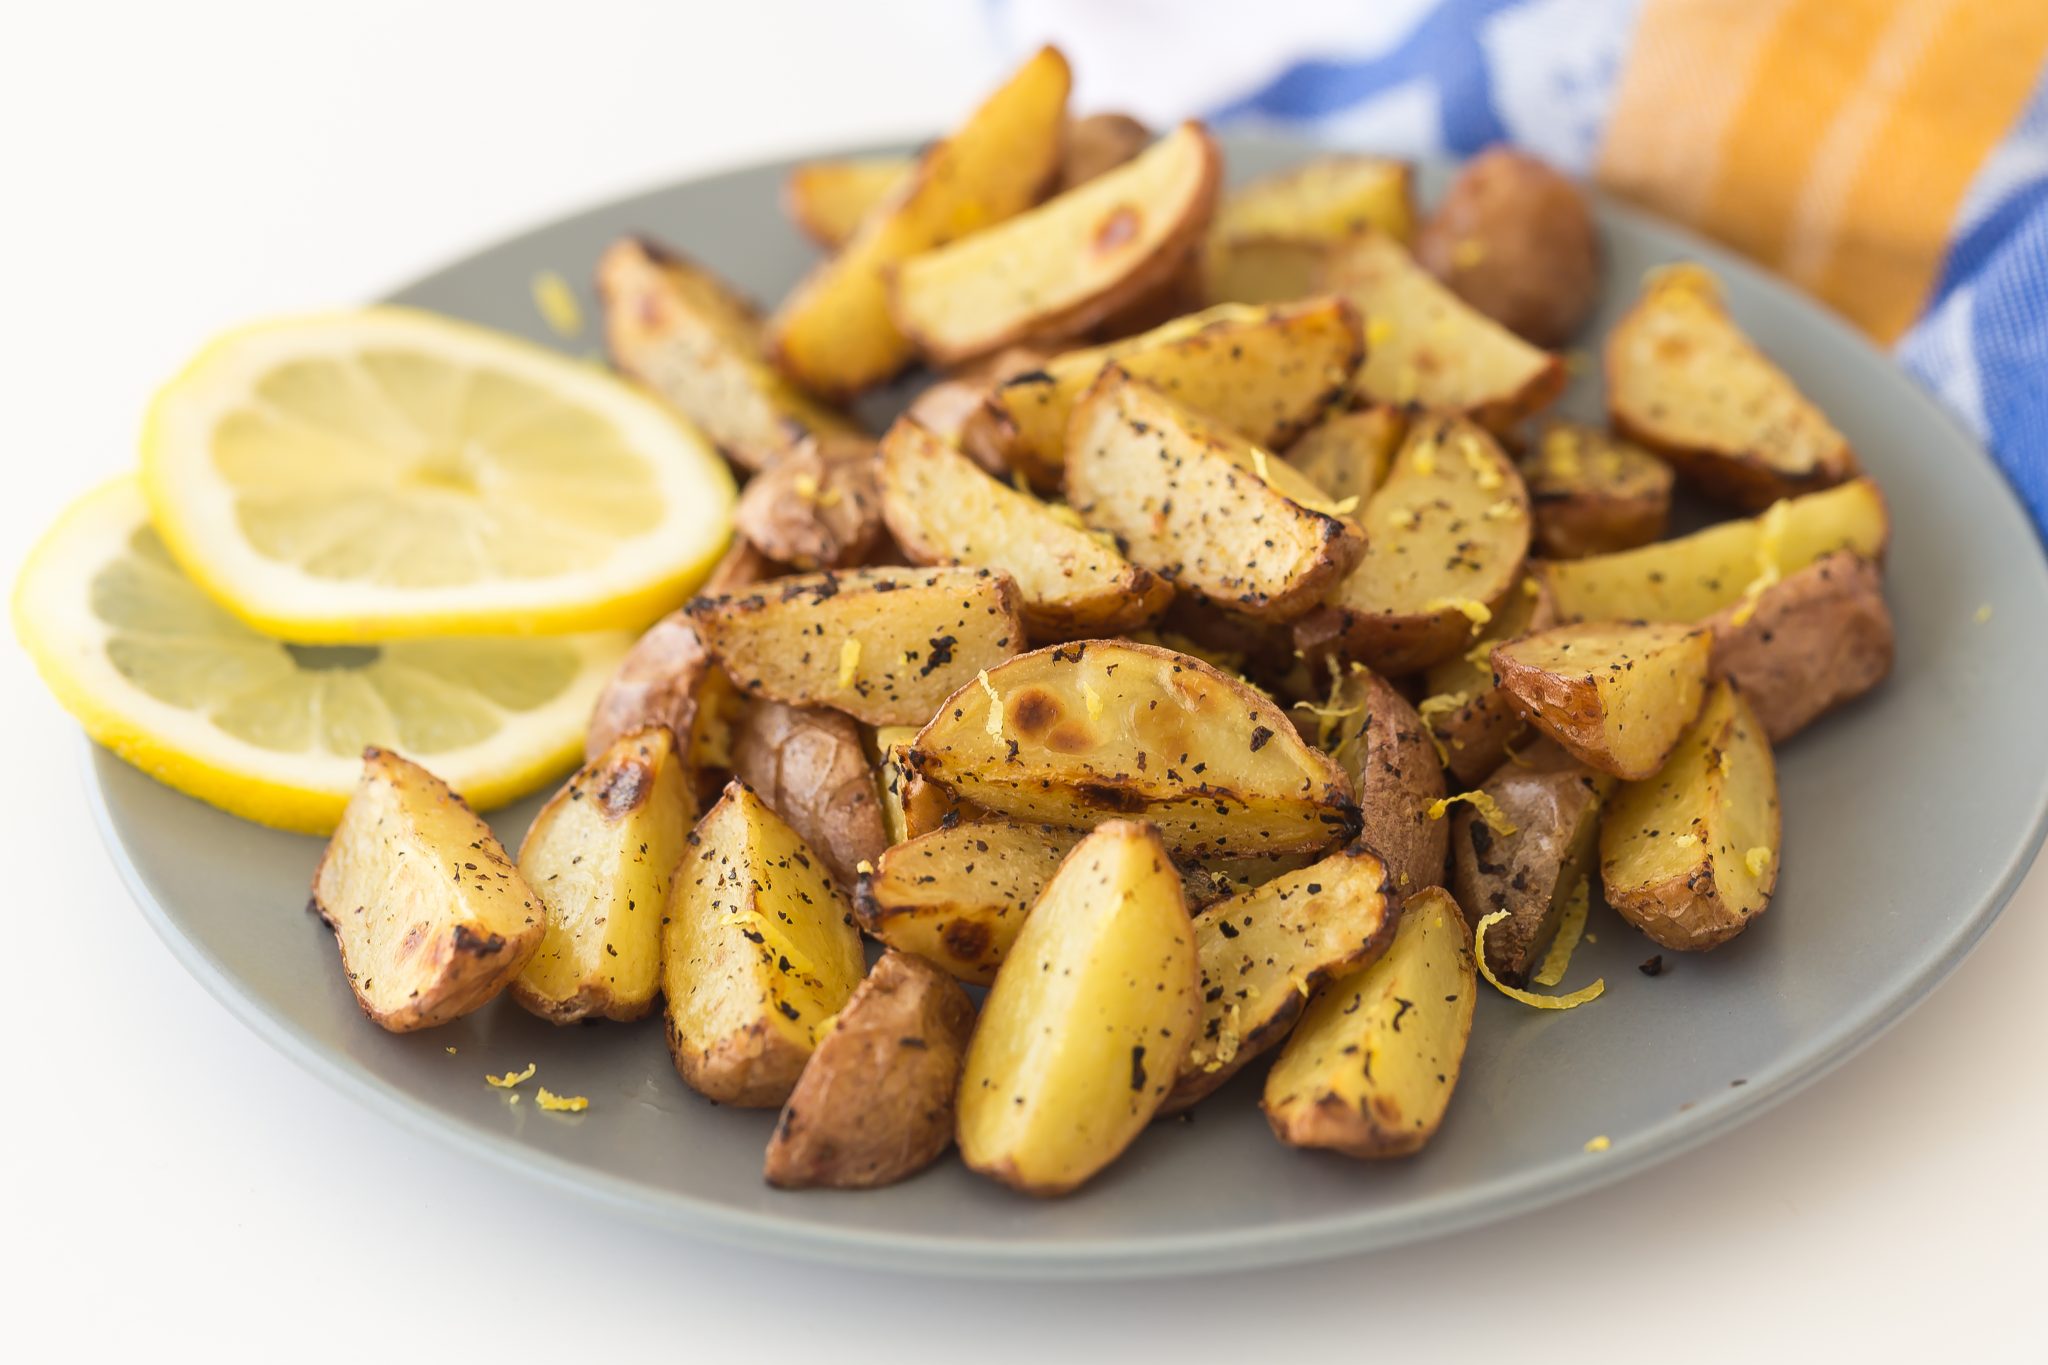 Potato Wedges with Lemon and Pepper - The Little Potato Company